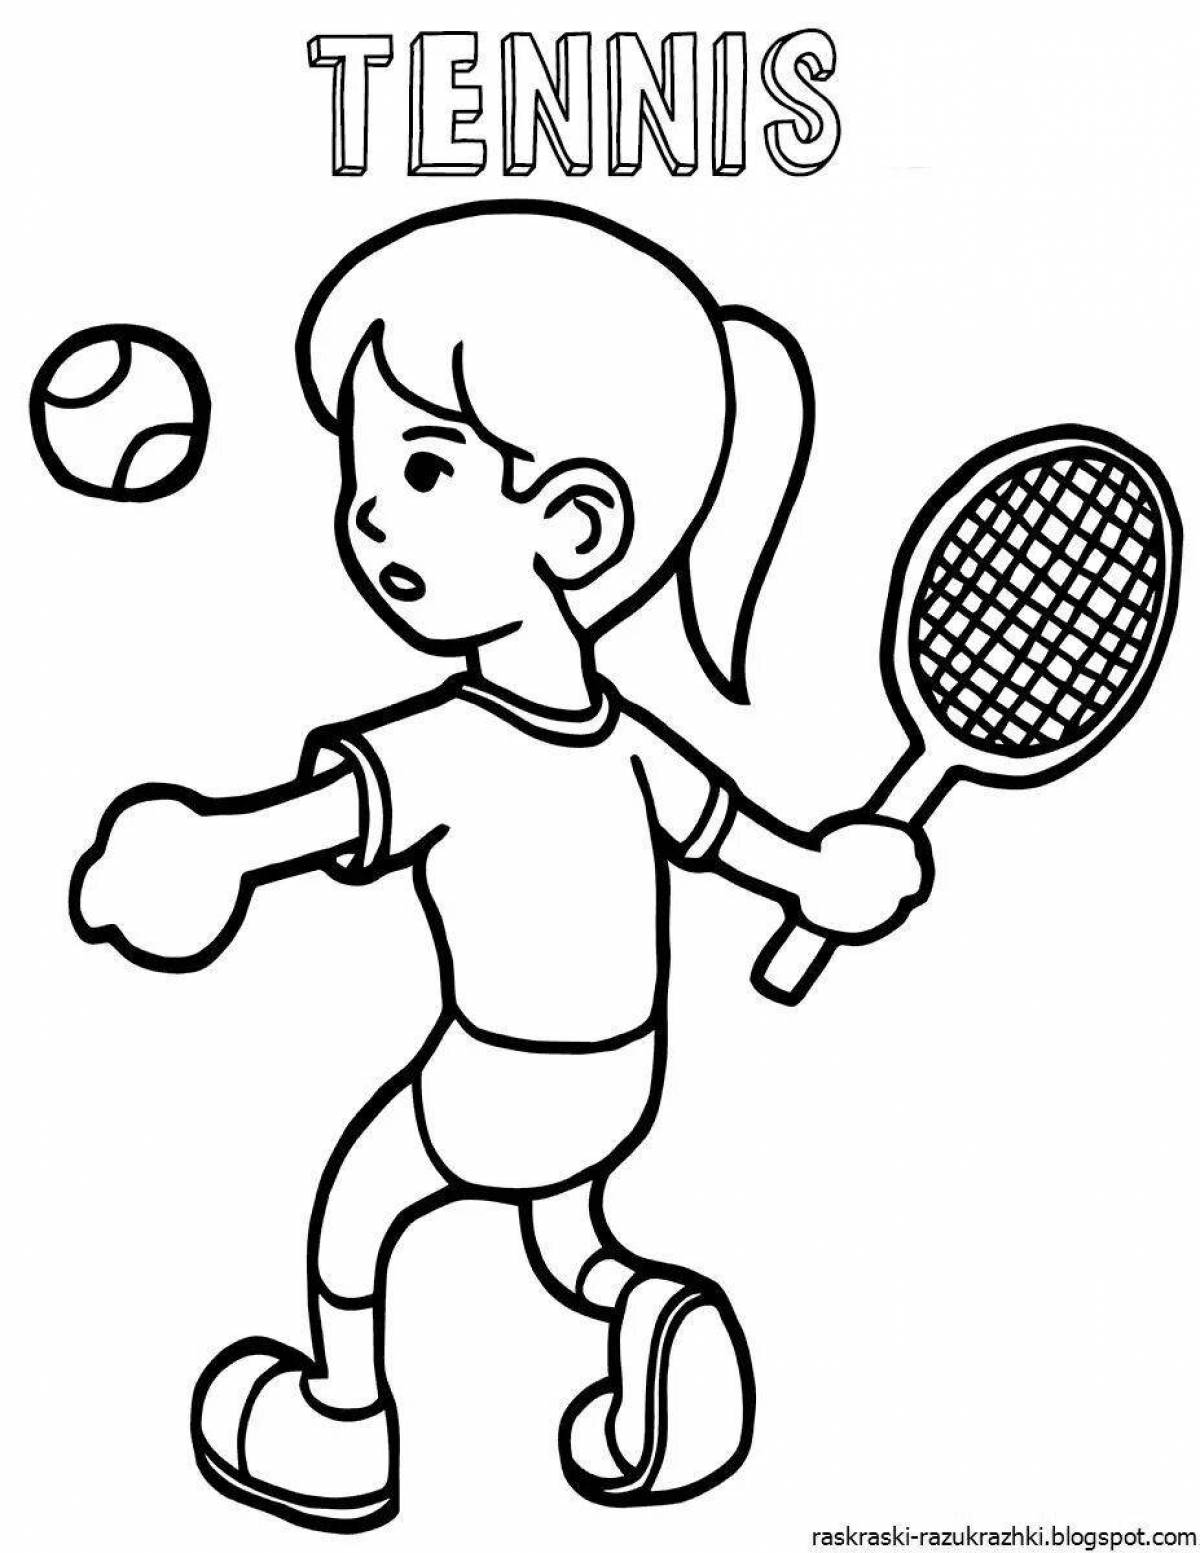 Amazing sports coloring book for 4-5 year olds